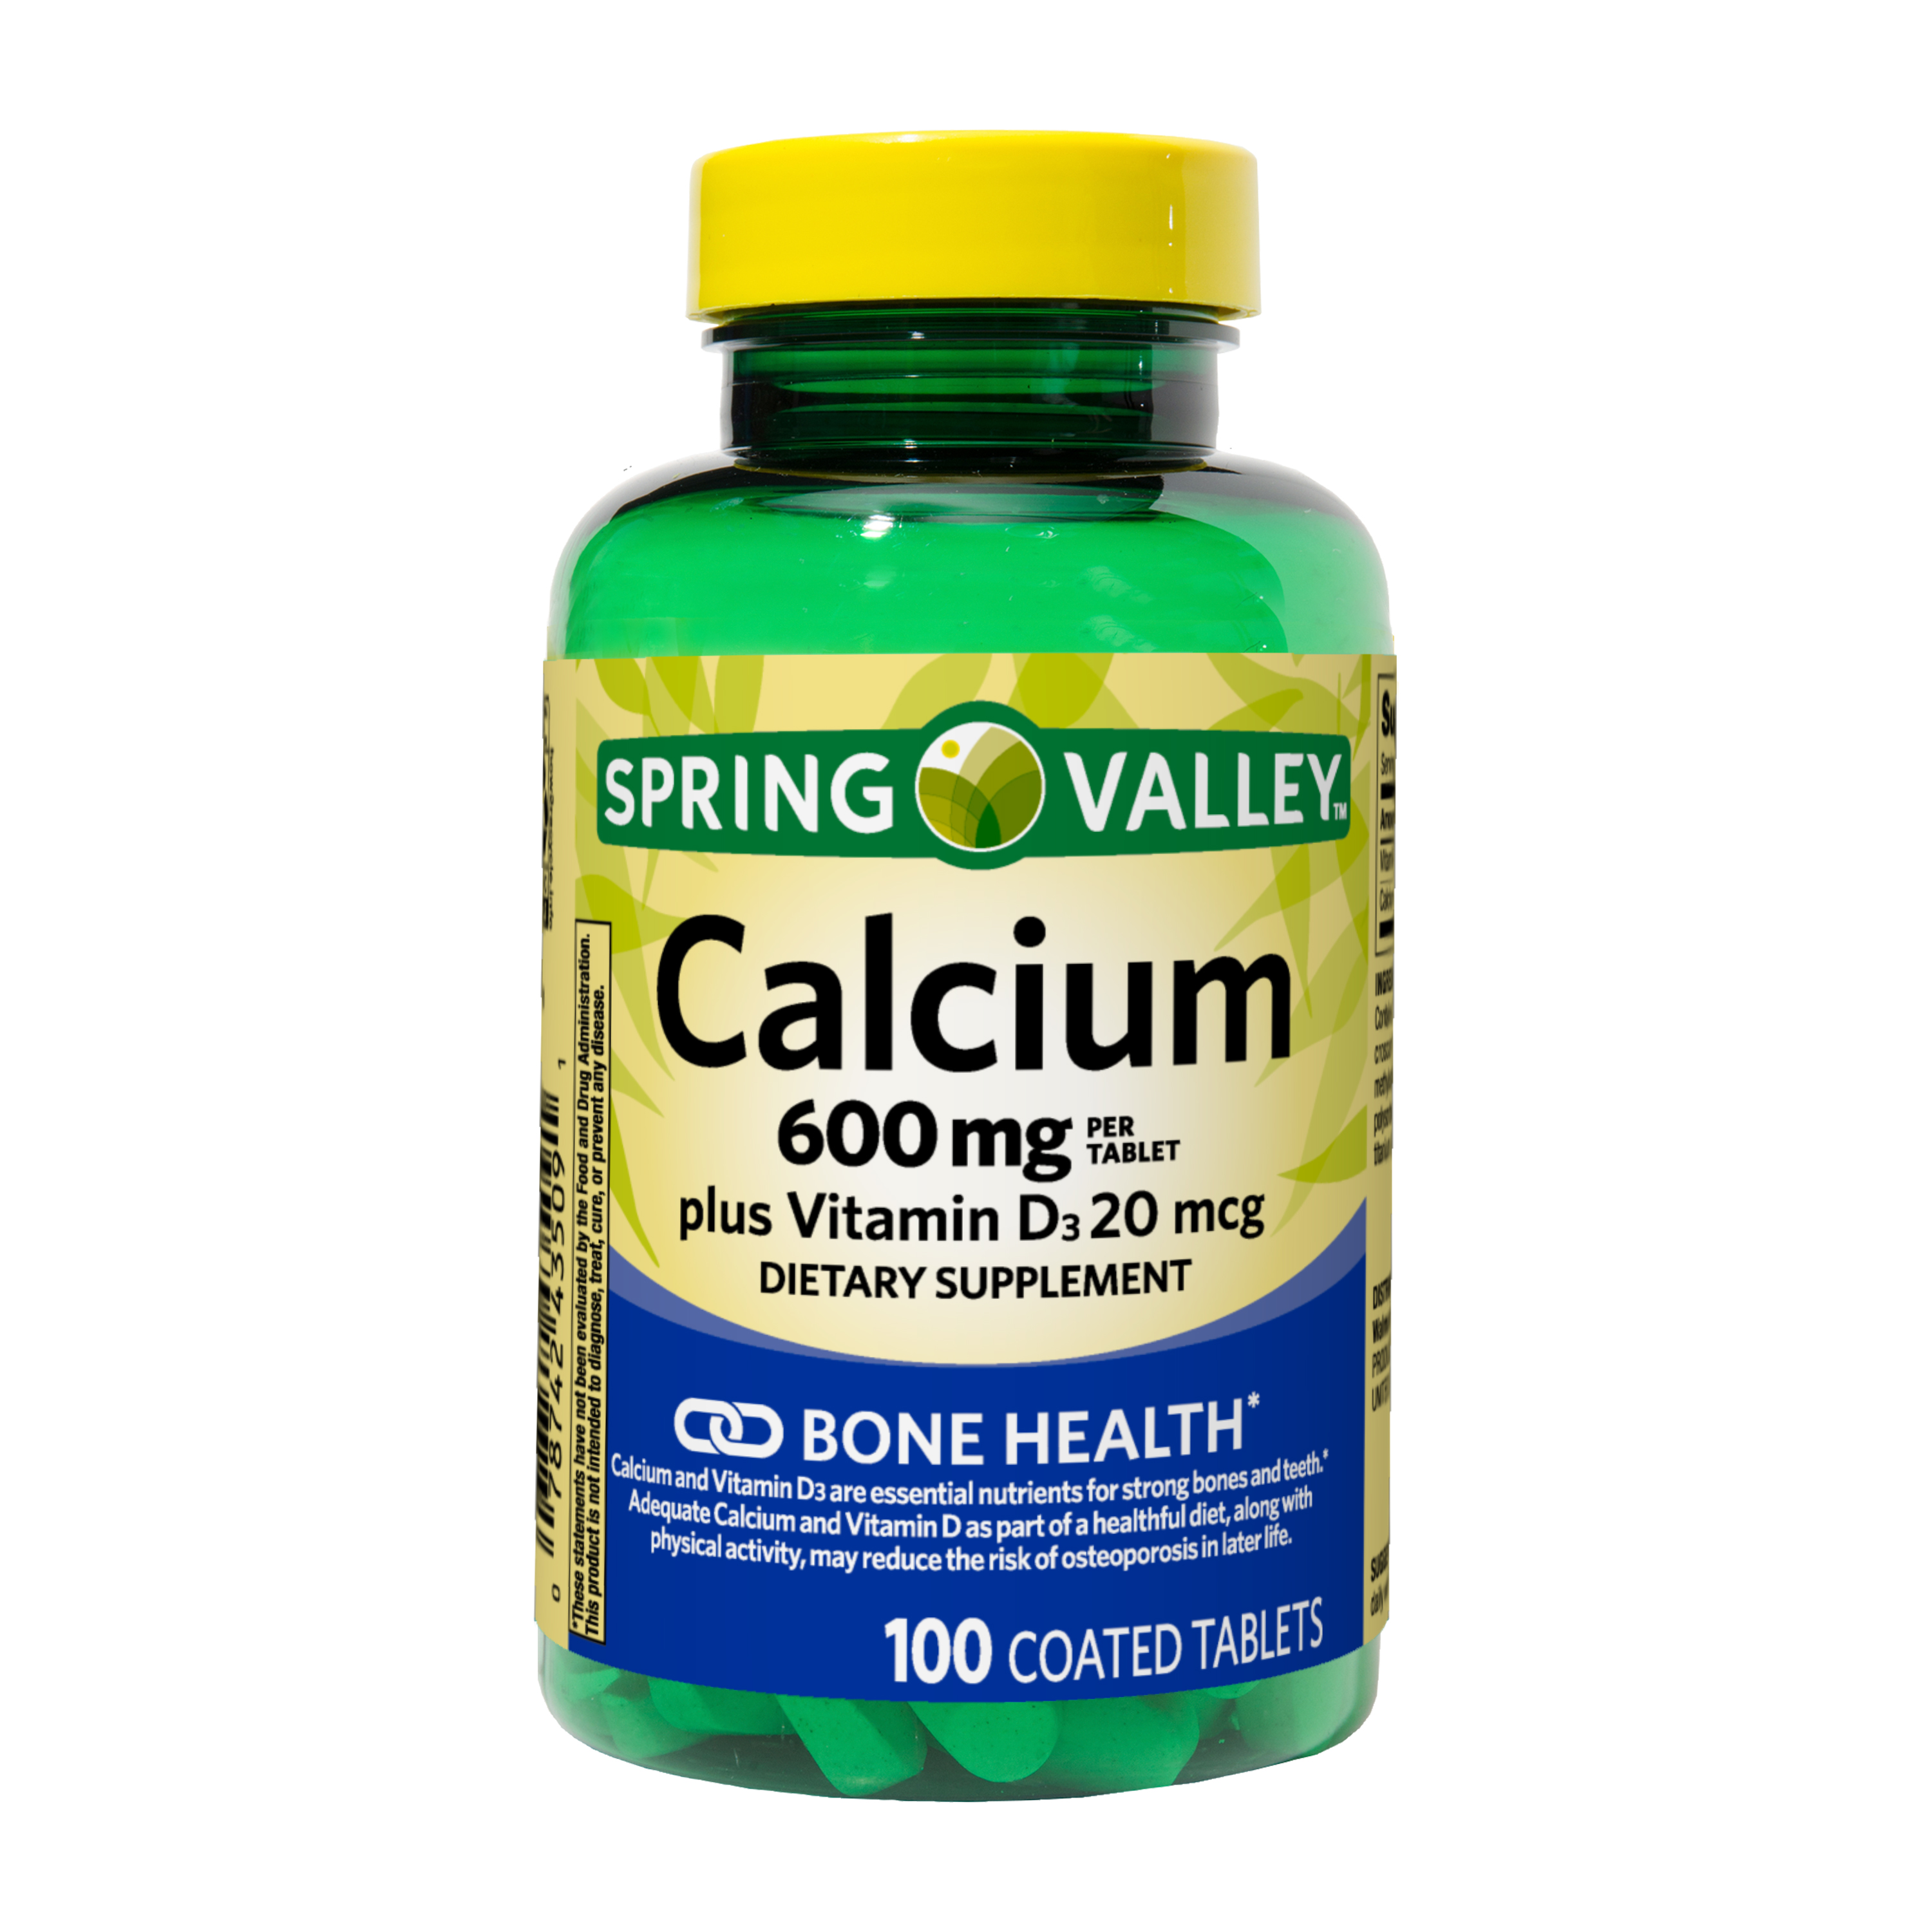 Spring Valley Calcium Plus Vitamin D Tablets Dietary Supplement, 600 mg, 100 Count - image 1 of 8